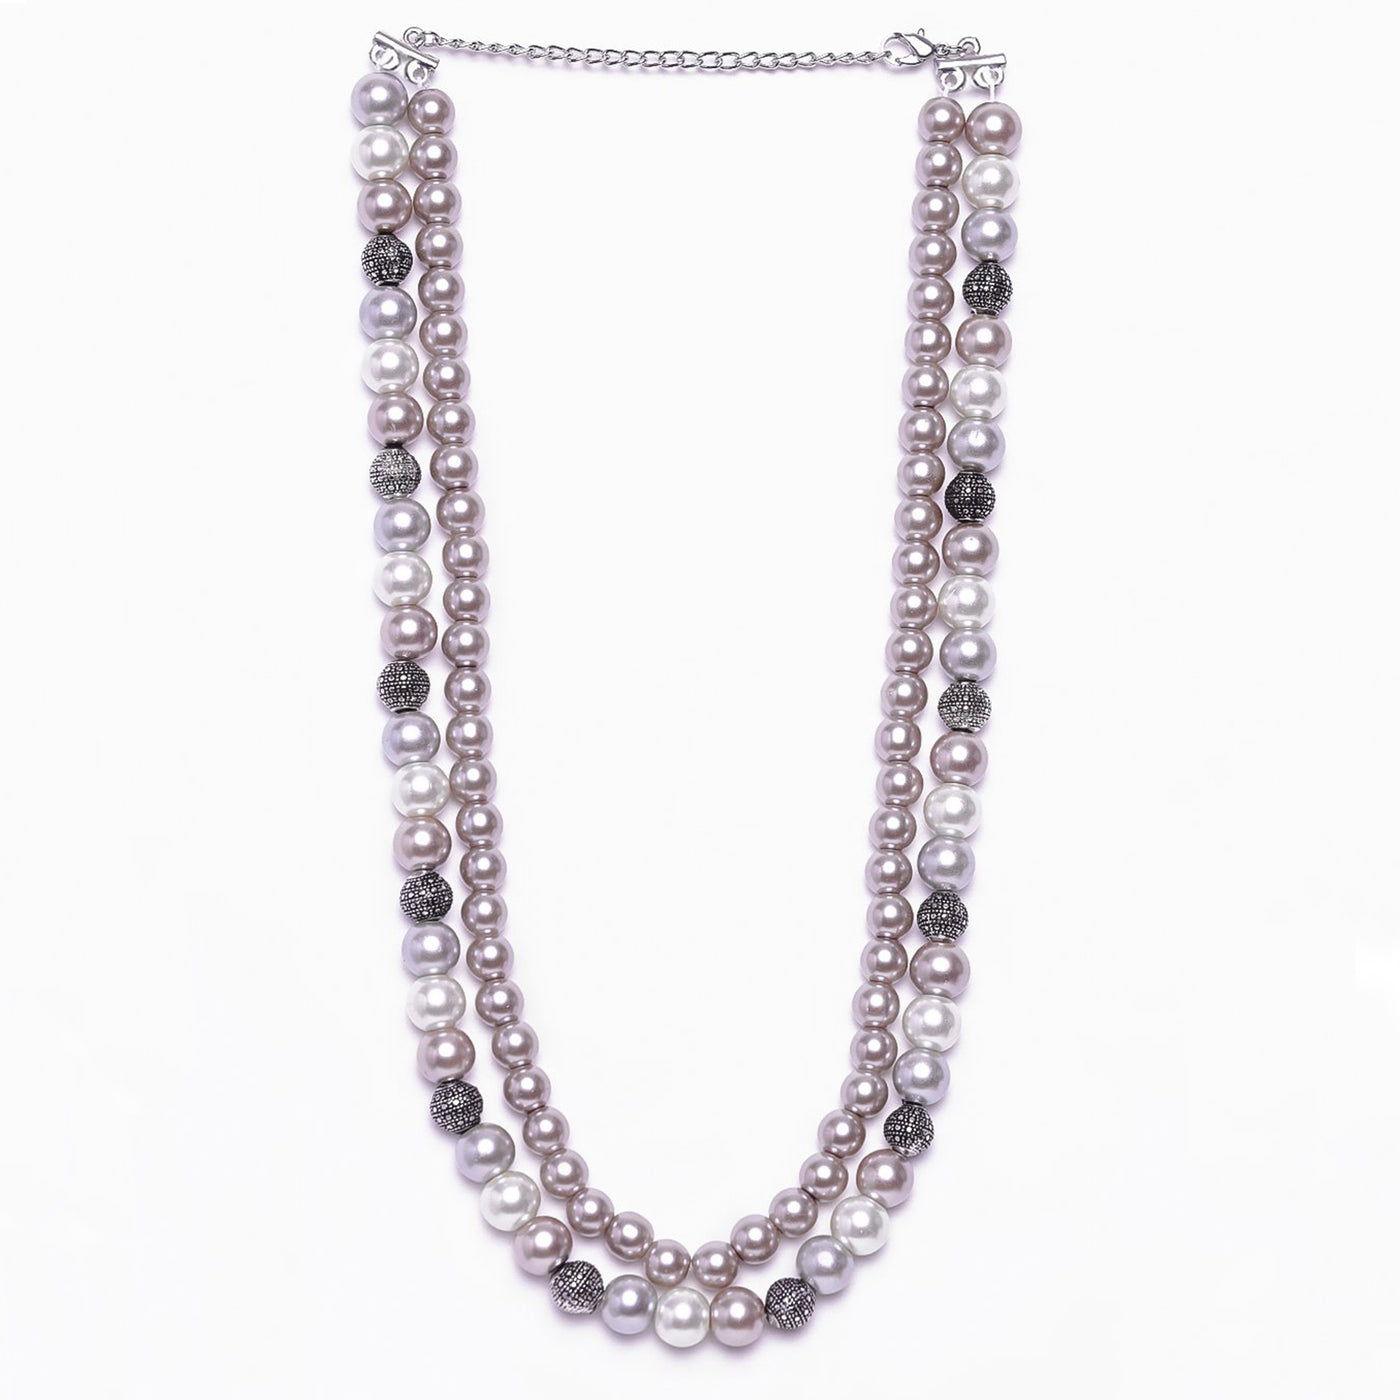 Estele - Pearly affair with white and shades of purple double line necklace